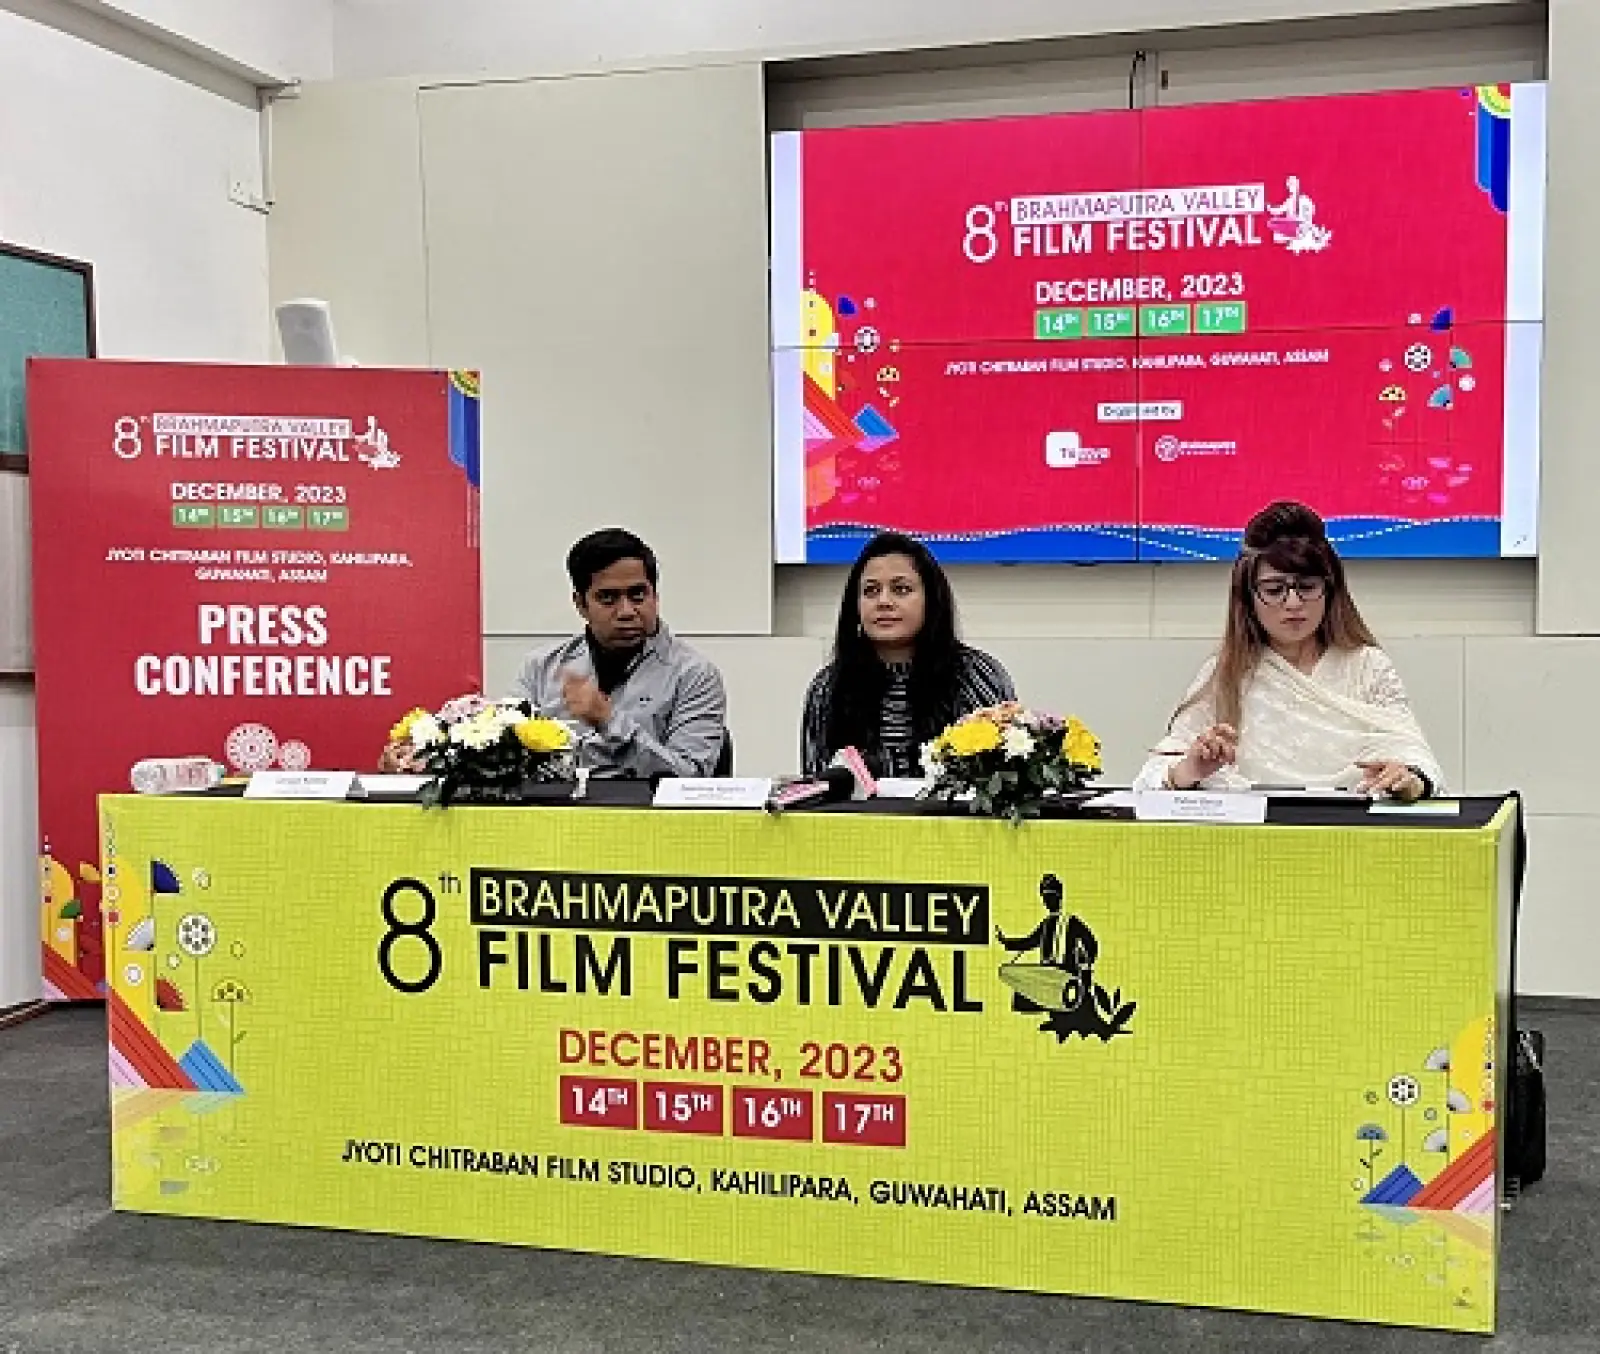 8th Brahmaputra Valley Film Festival (BVFF) to be Held in Guwahati from December 14 to 17 - Includes Exciting Line up, Master classes, Workshops and More